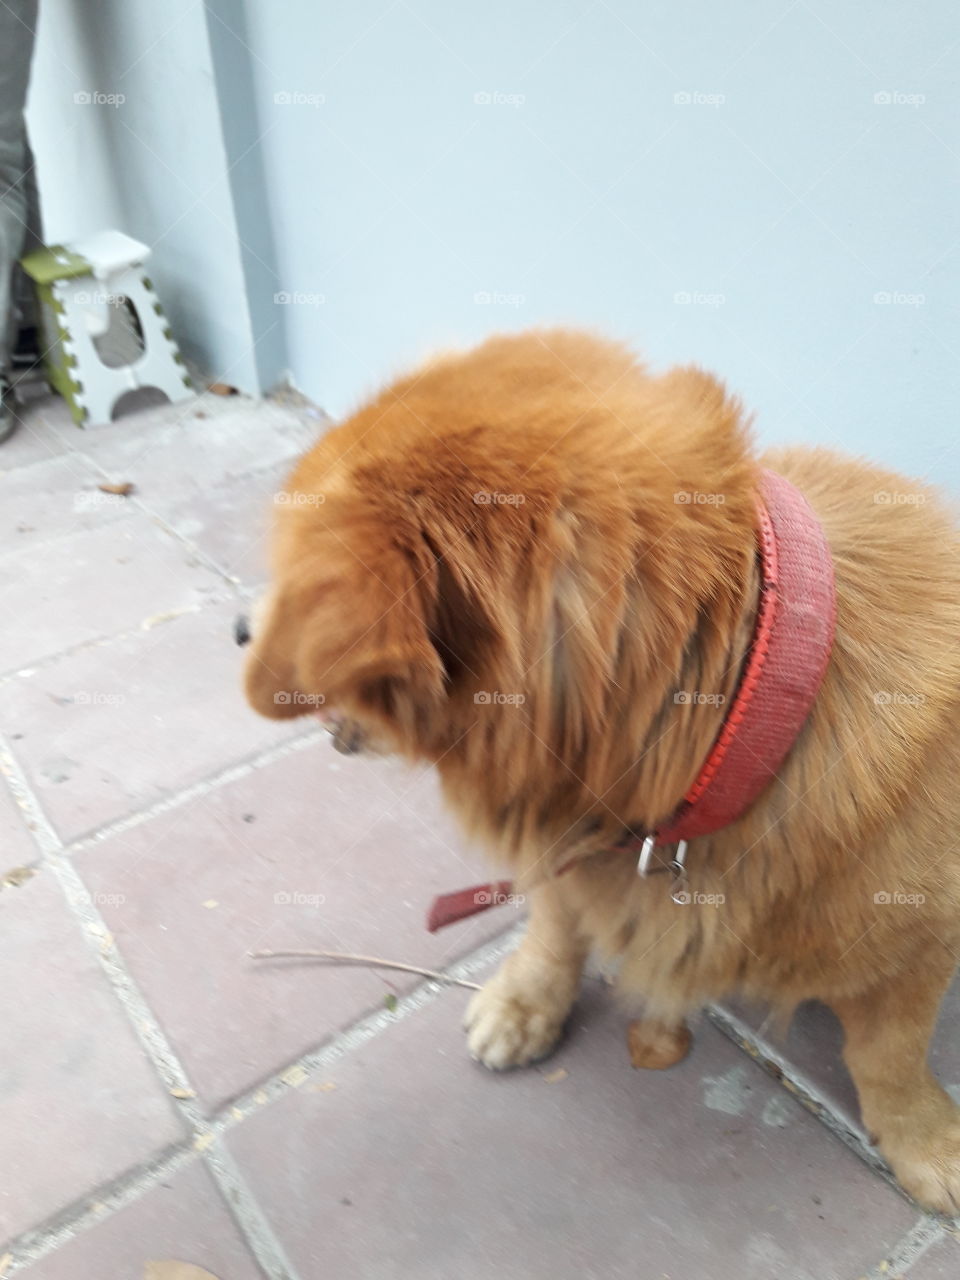 I try to photo this orange brown dog  by focus camera to his face. When he see the camera he will turn away his head to  another way every time.